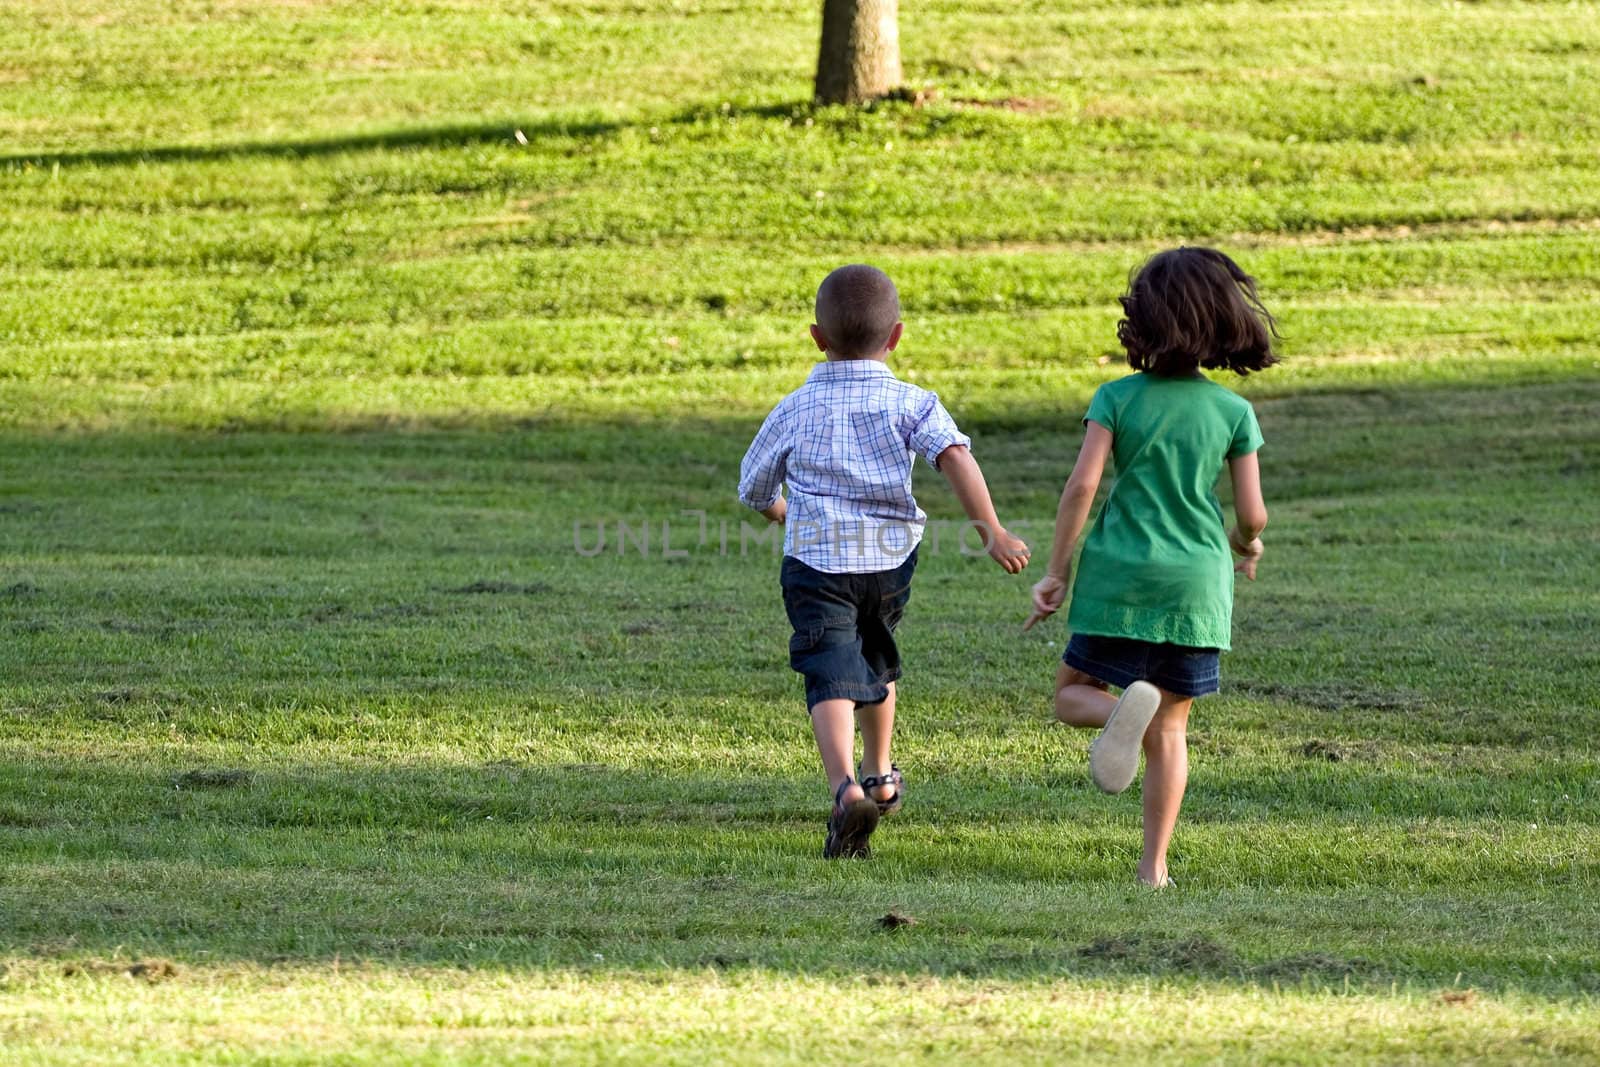 A little boy and girl run through the grassy field without a care in the world.